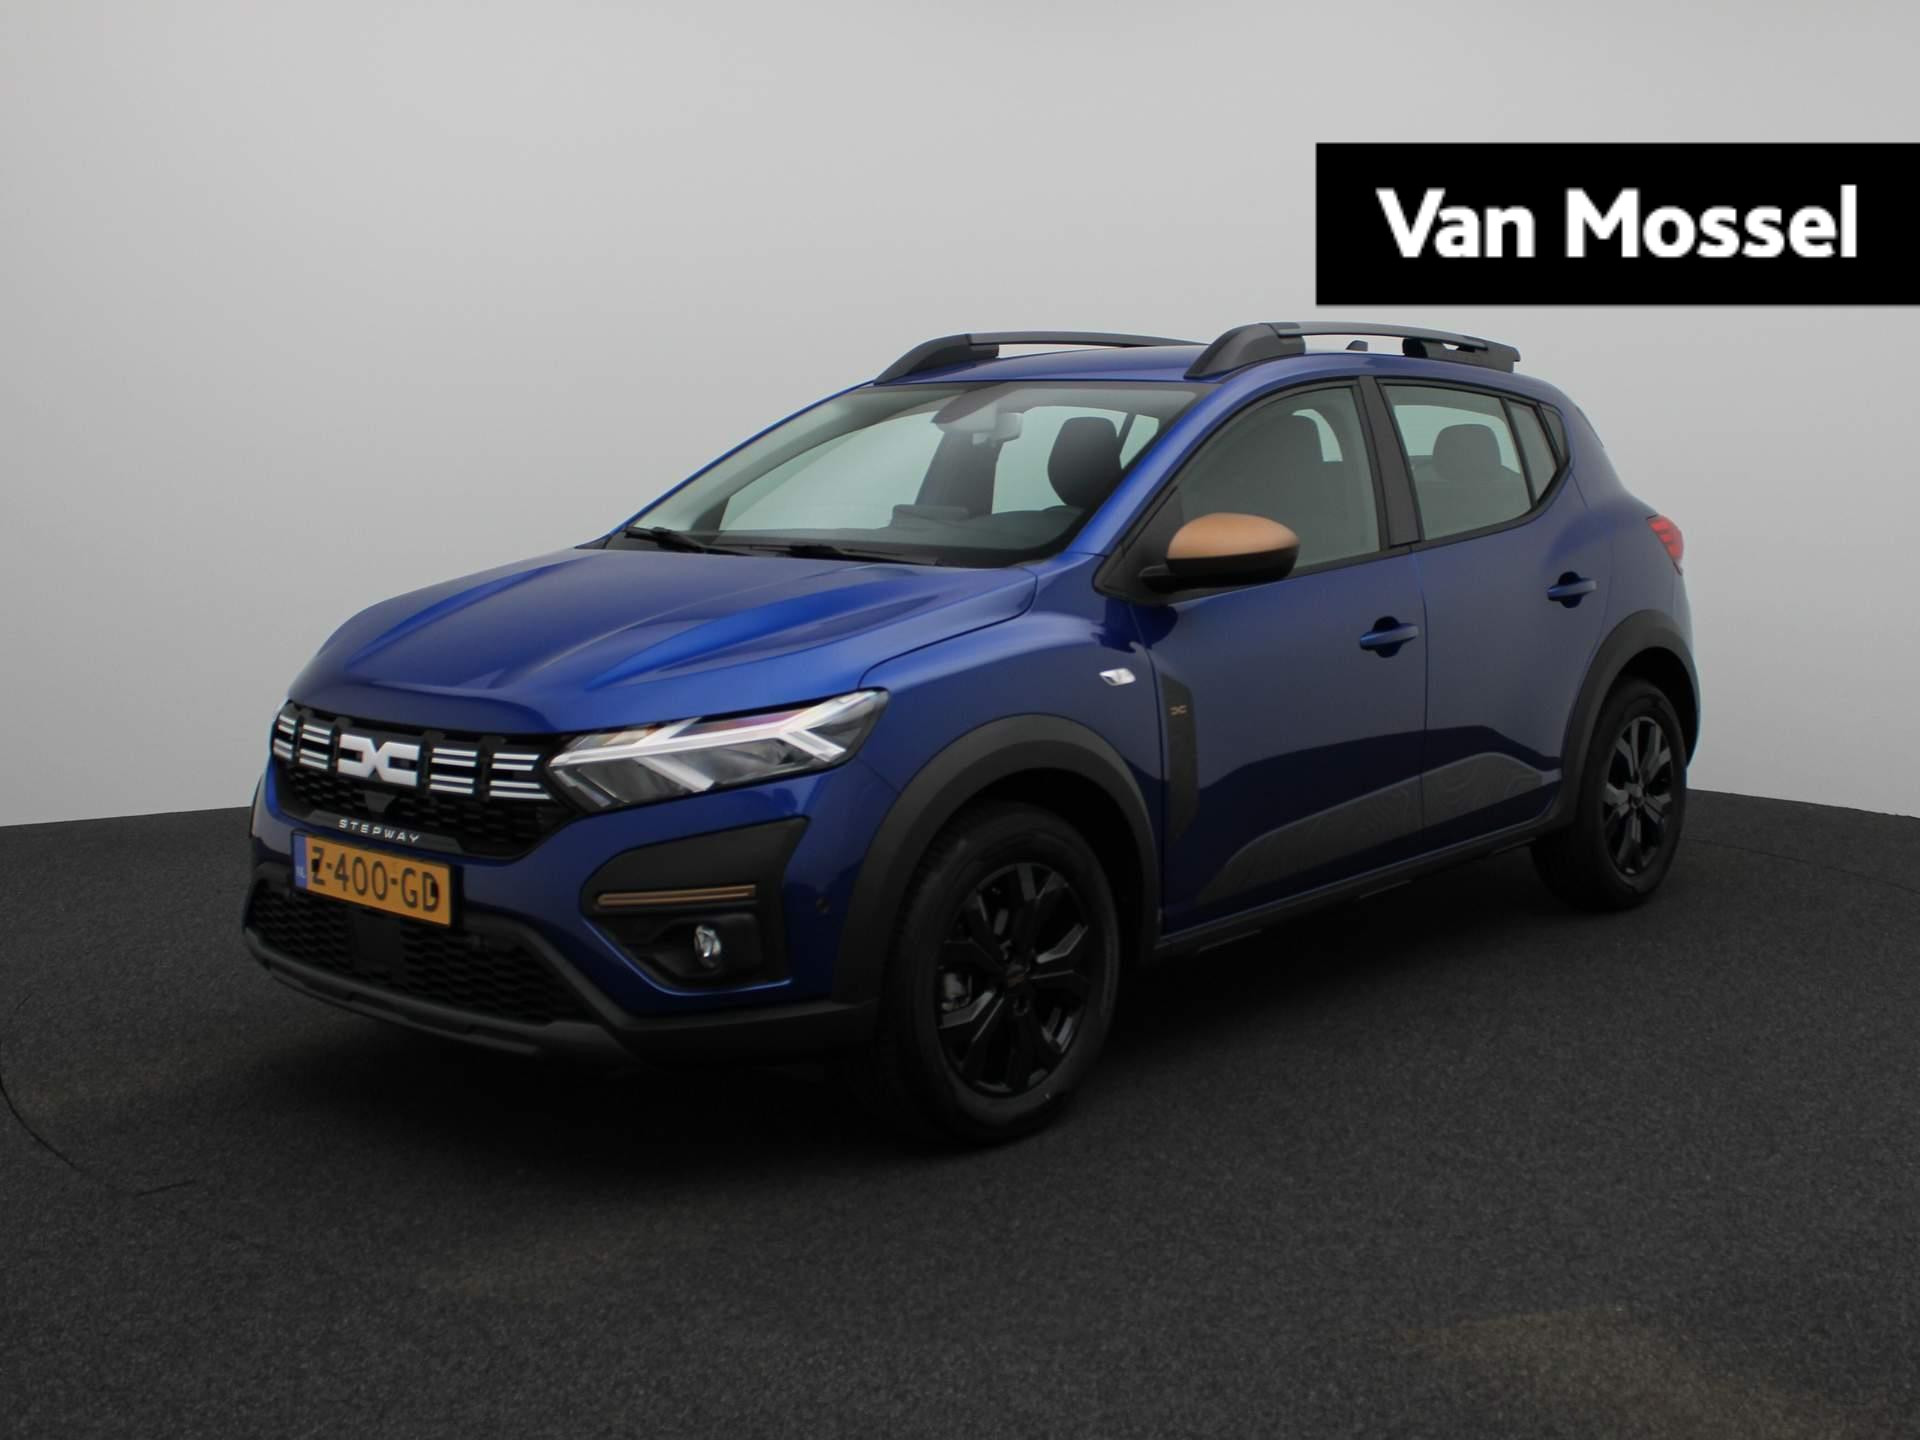 Dacia Sandero Stepway TCe 110 Extreme | Pack Extreme | Camera | PDC Voor + Achter | LED-Verlichting | Keyless | Climate Control | 16" LMV | Apple Carplay & Android Auto